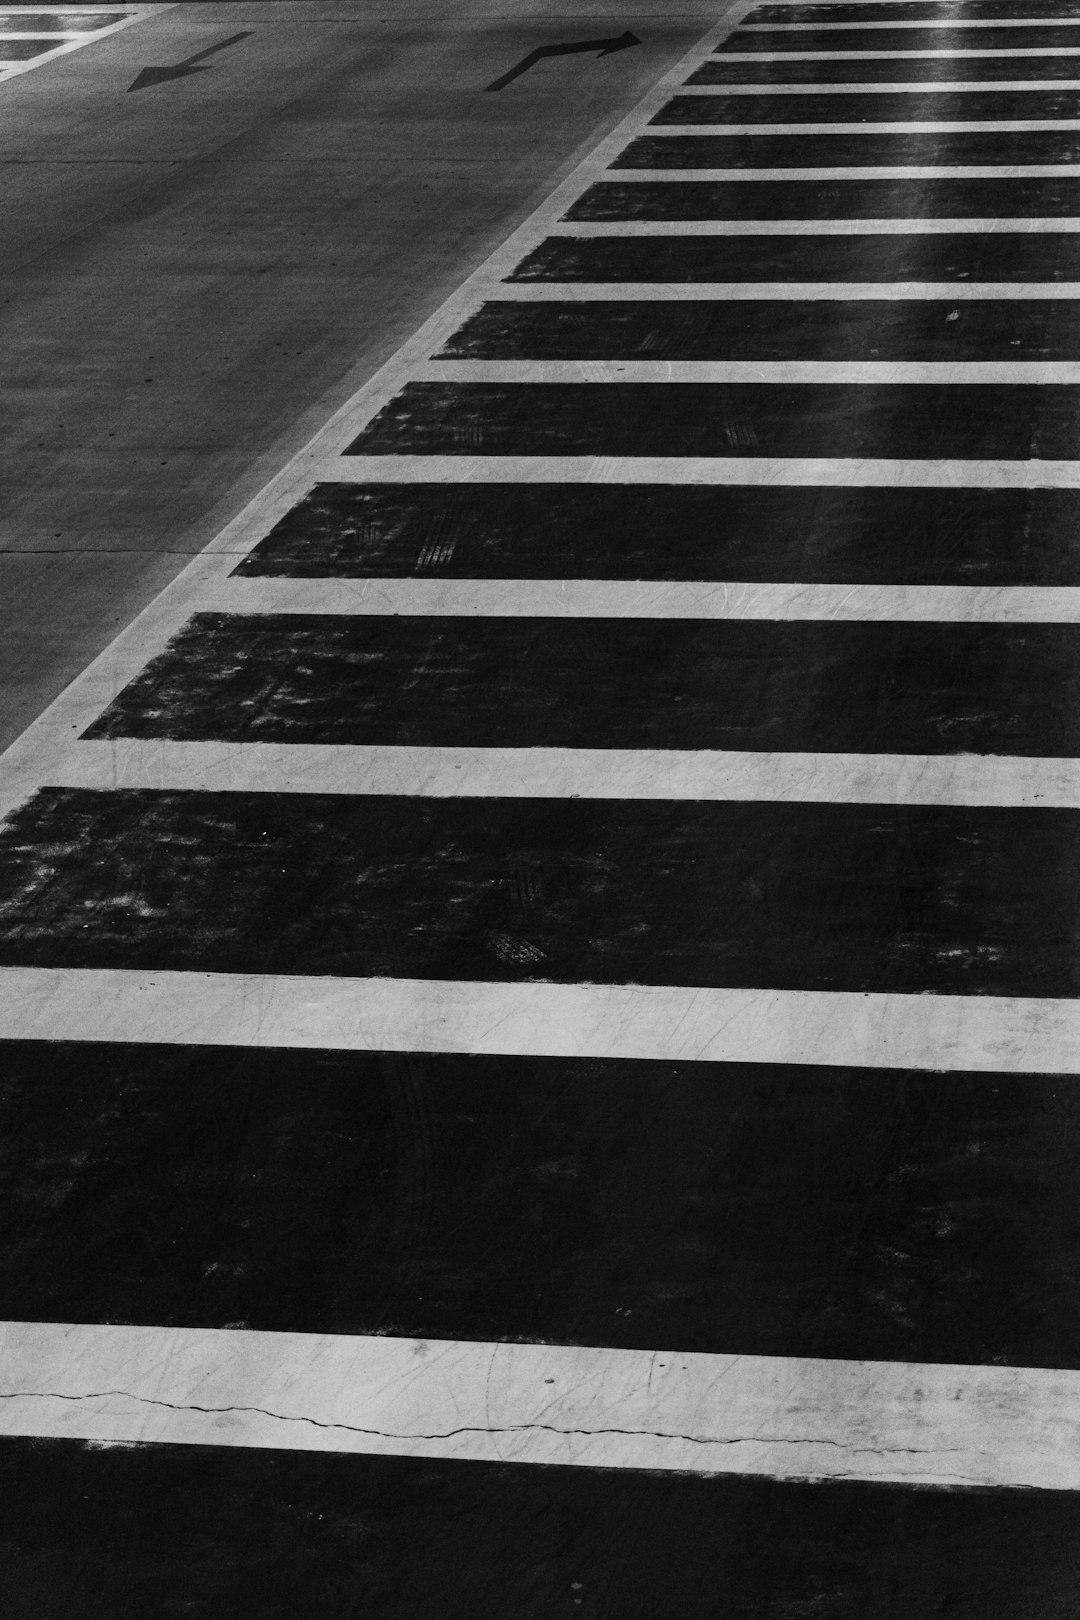 Black and white photograph of the crosswalk stripes on an empty street, capturing their contrast against the asphalt. The lines create a stark visual effect that emphasizes depth in the urban landscape. High-resolution photography with natural lighting to highlight details. A minimalistic composition focusing only on these striking painted strokes, creating a powerful yet simple aesthetic. –ar 85:128